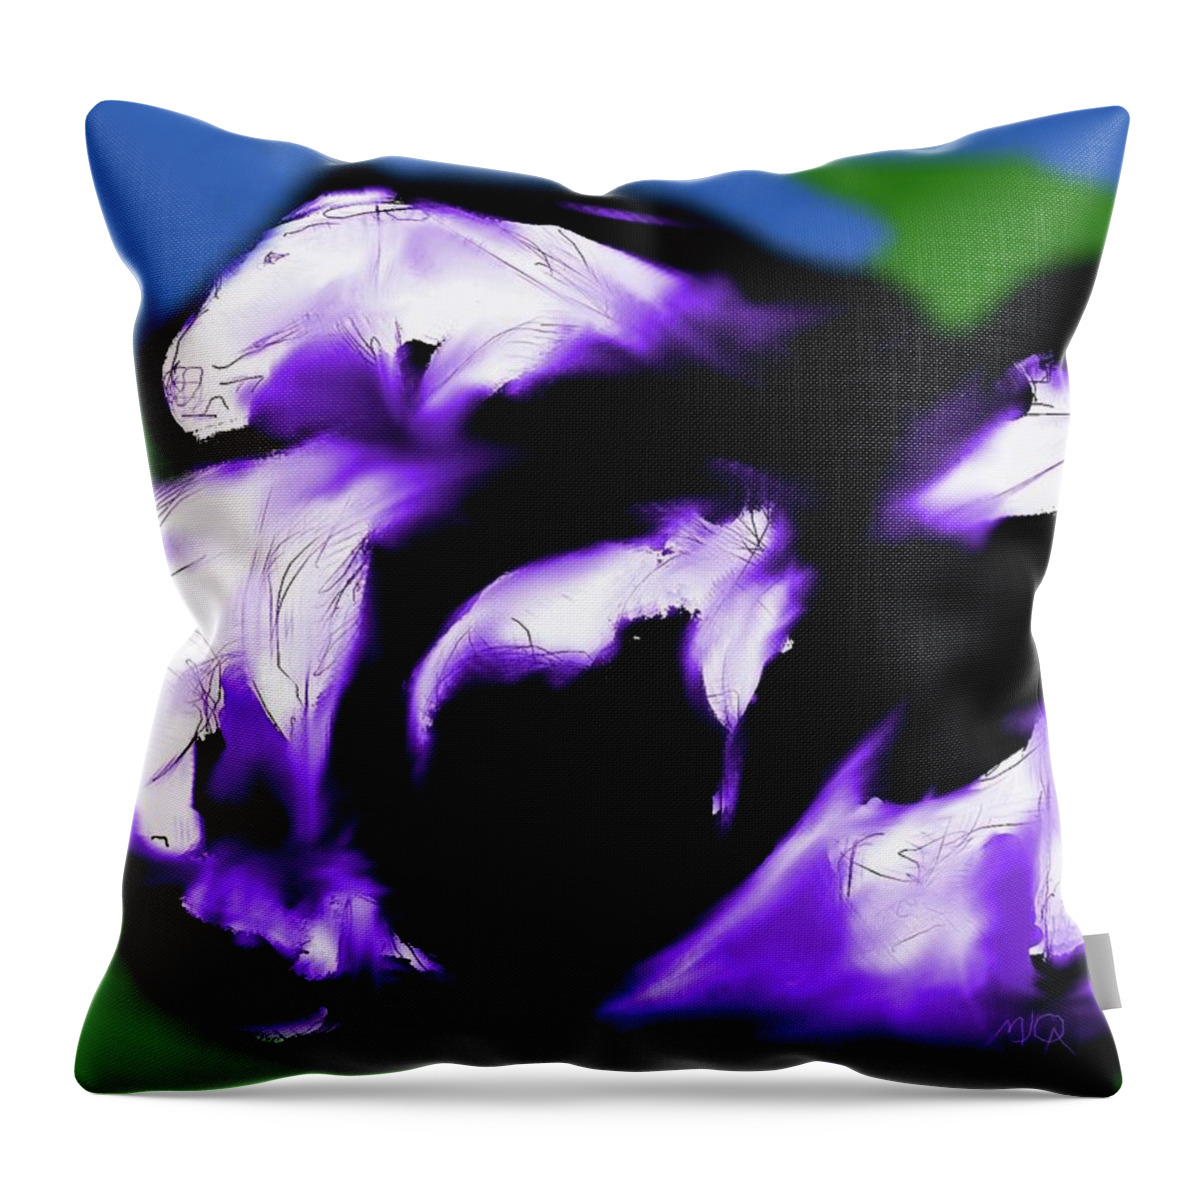 Abstract Throw Pillow featuring the digital art Fragments by Mary Armstrong